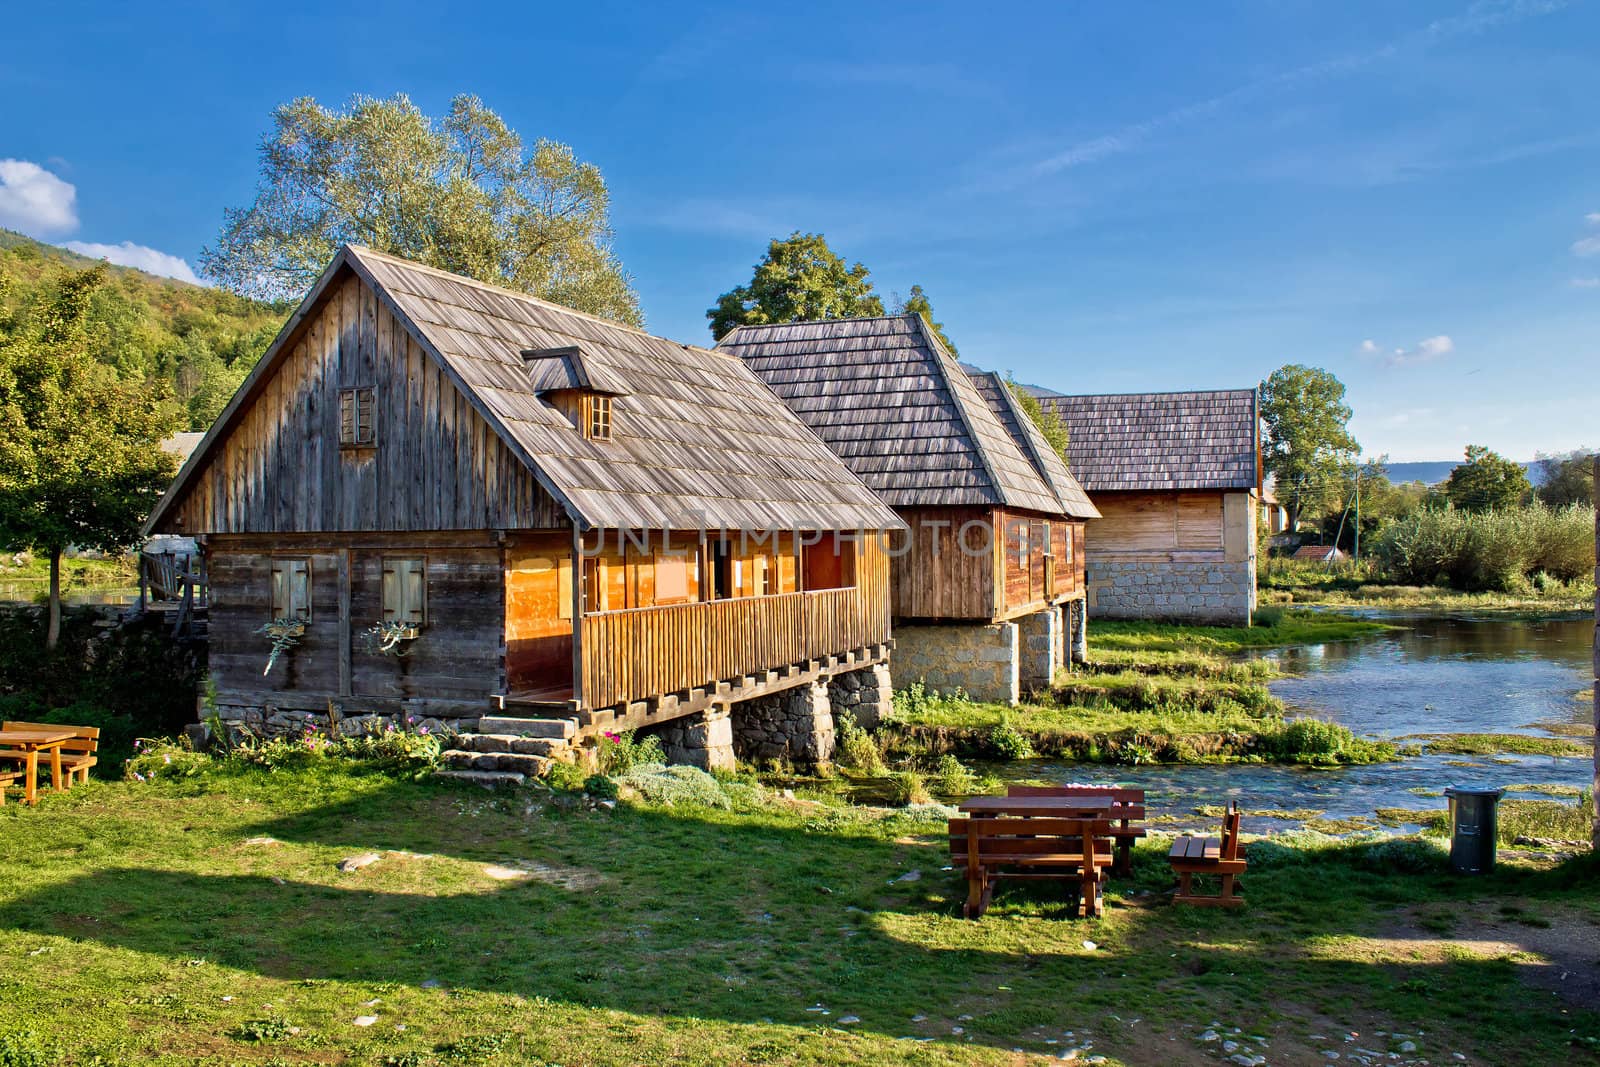 Old historic village with wooden cottages on Gacka river source, Majerovo vrilo, Lika, Croatia